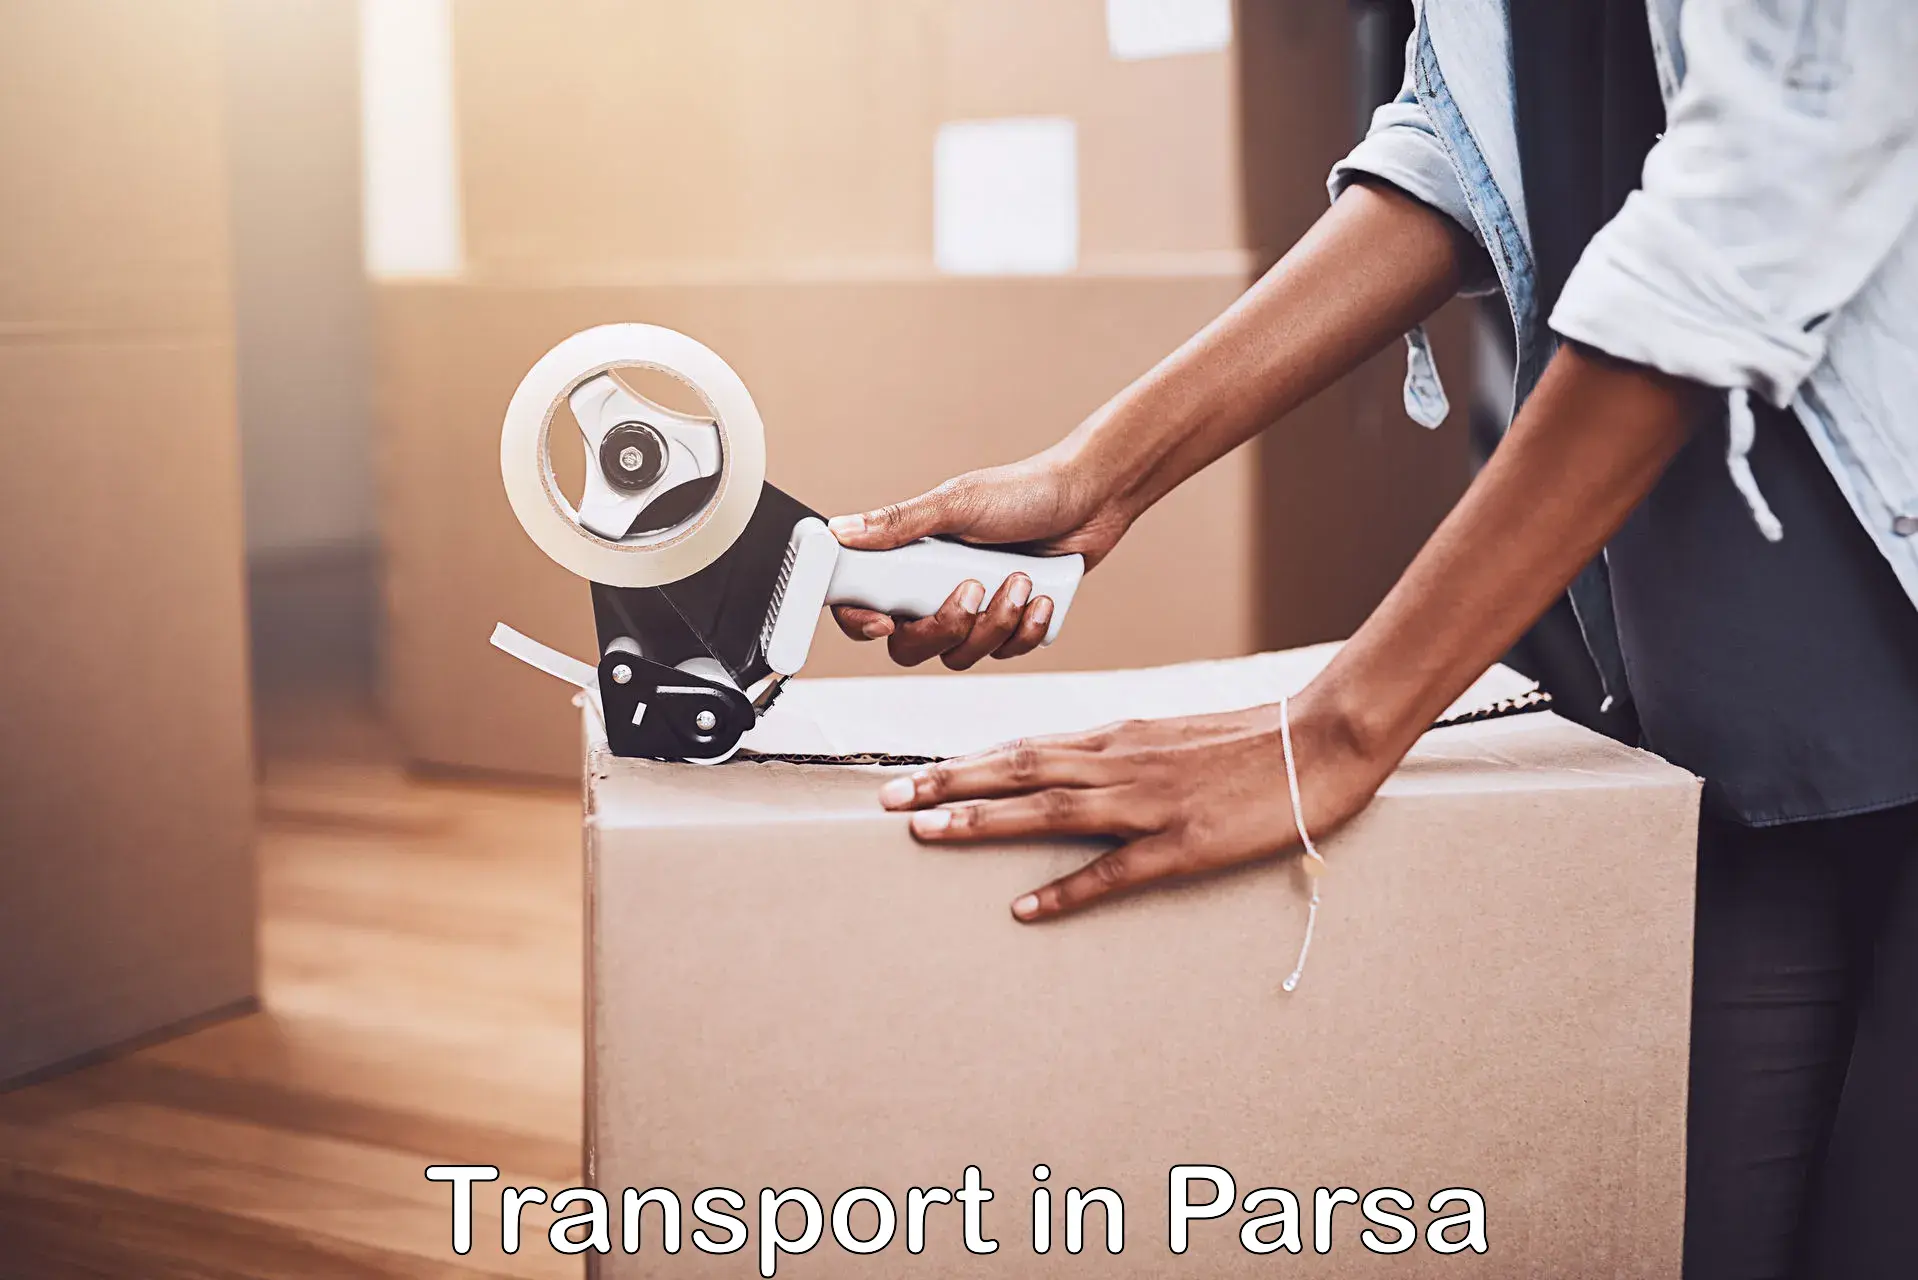 Daily transport service in Parsa